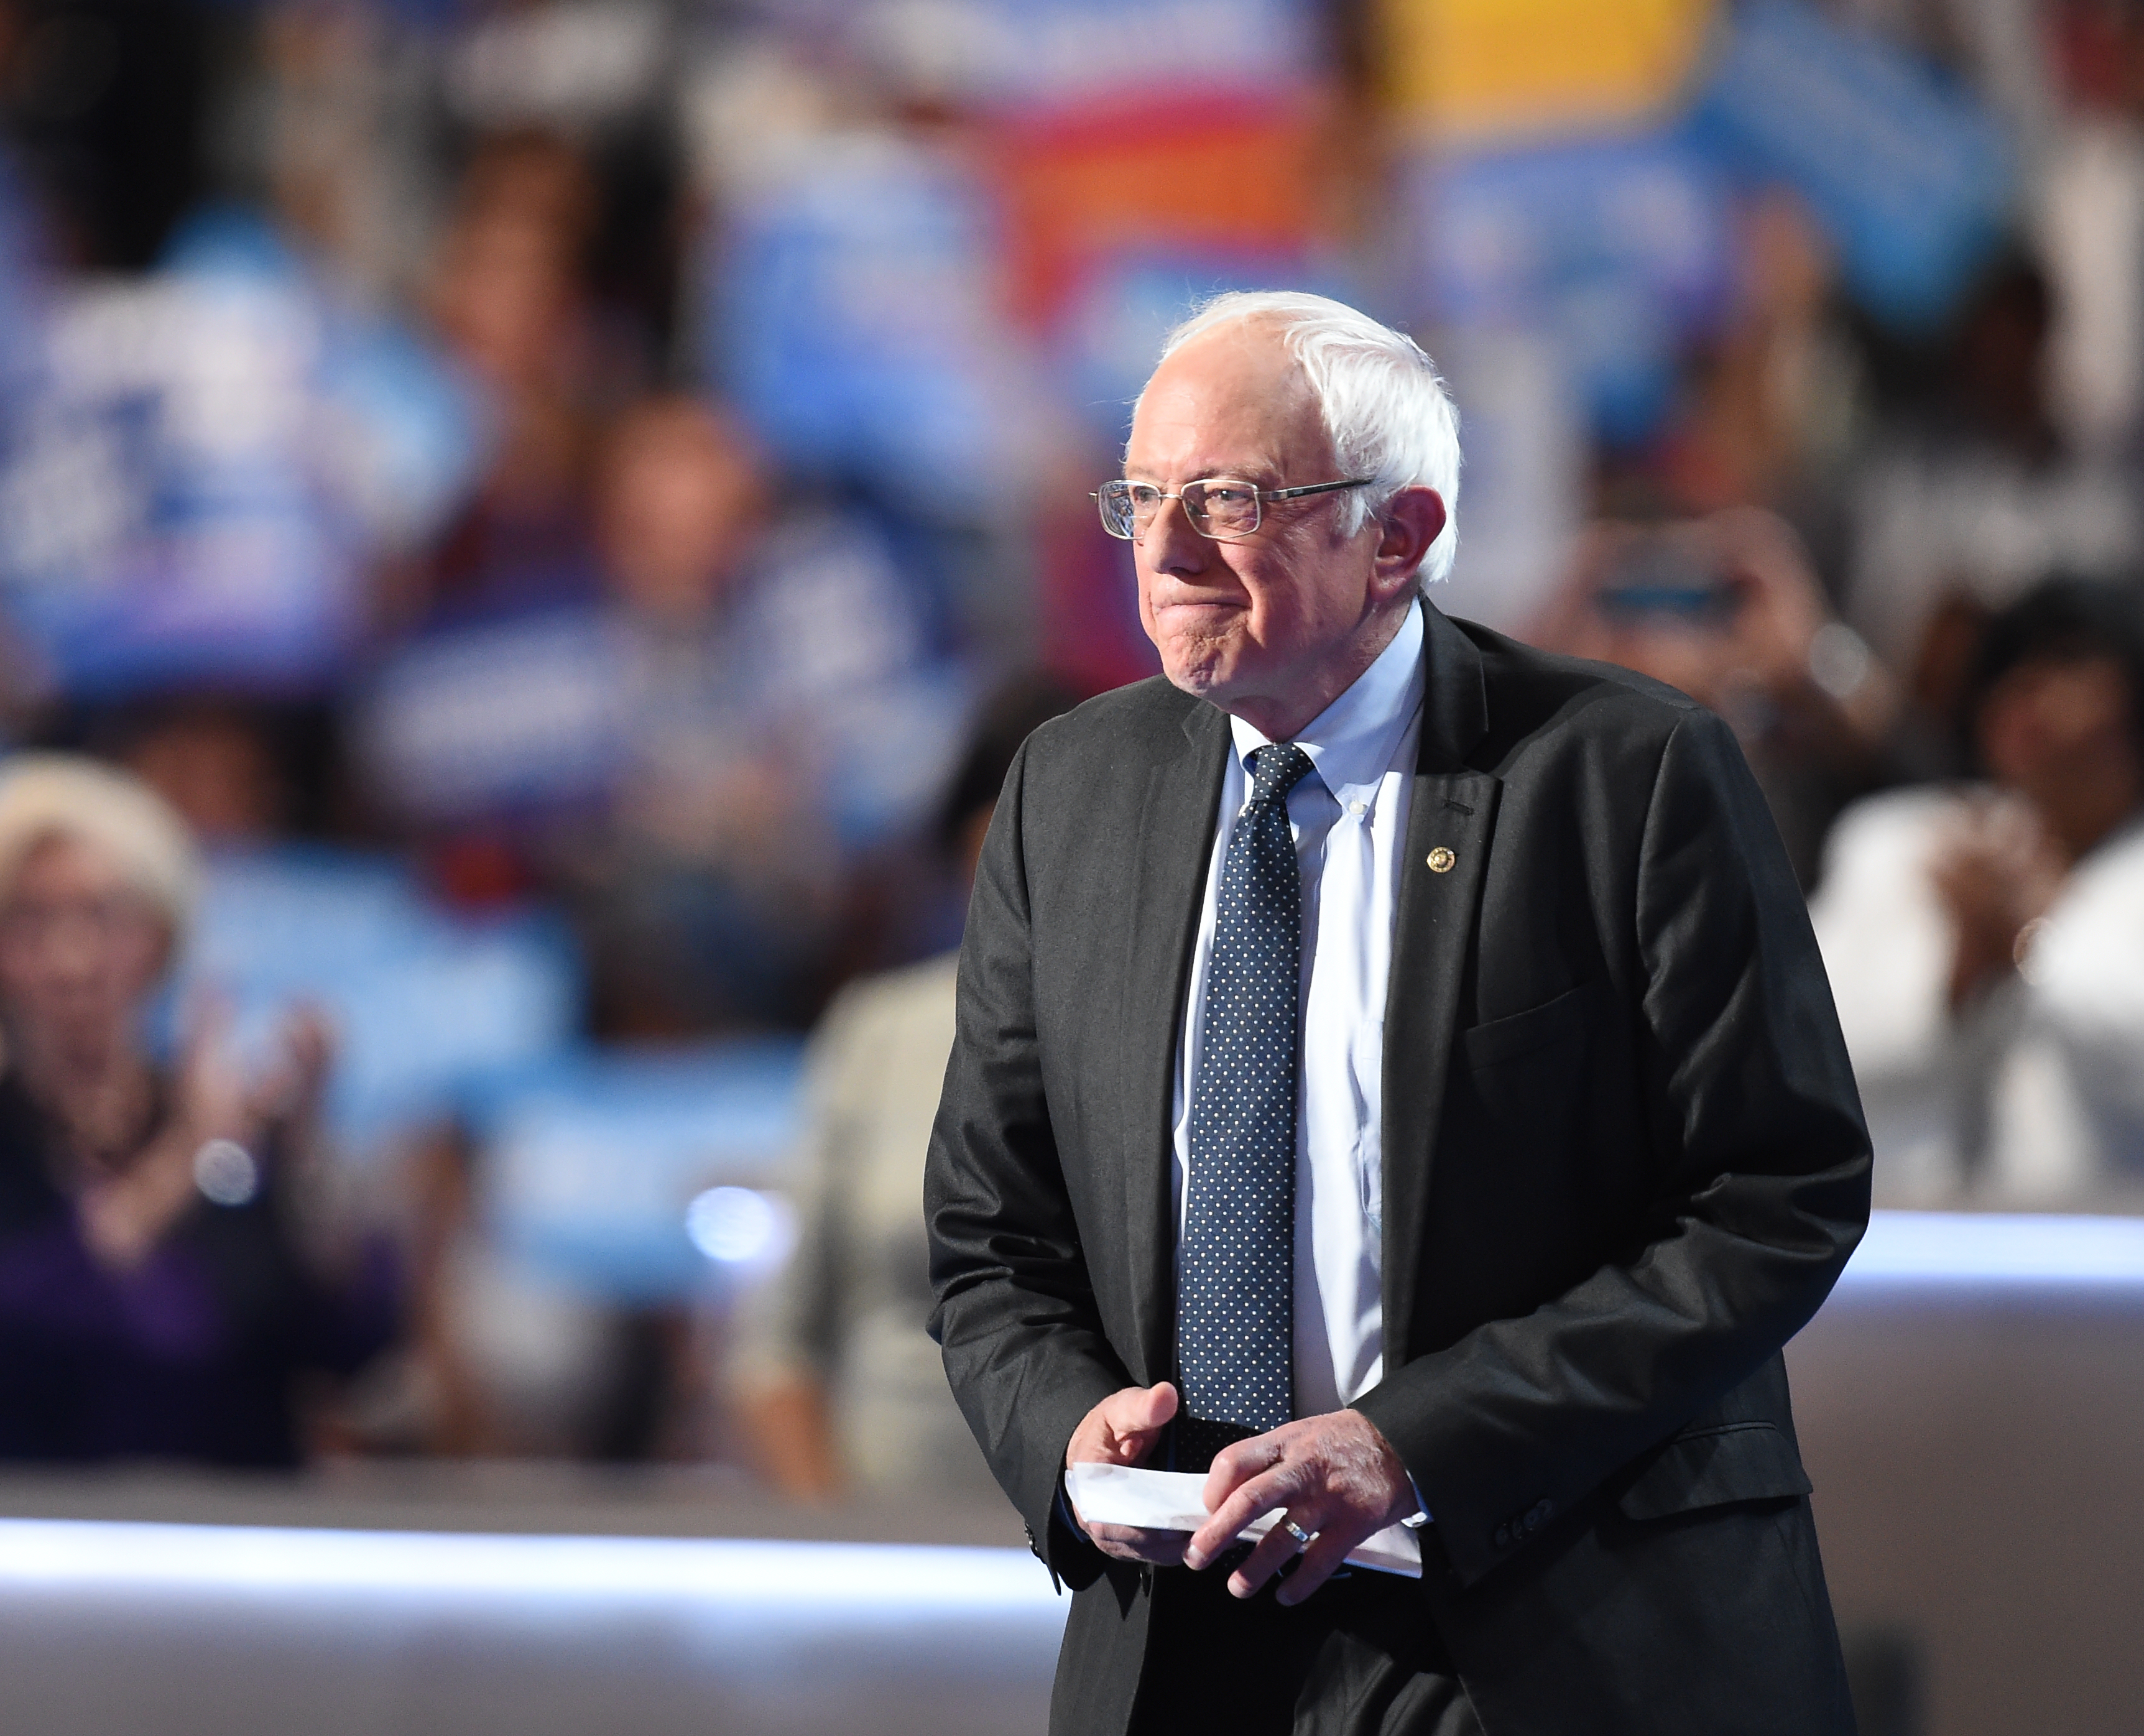 Vermont Senator and former Democratic presidential candidate Bernie Sanders arrives to address Day 1 of the Democratic National Convention at the Wells Fargo Center in Philadelphia, Pennsylvania, July 25, 2016. / AFP PHOTO / Robyn BECK